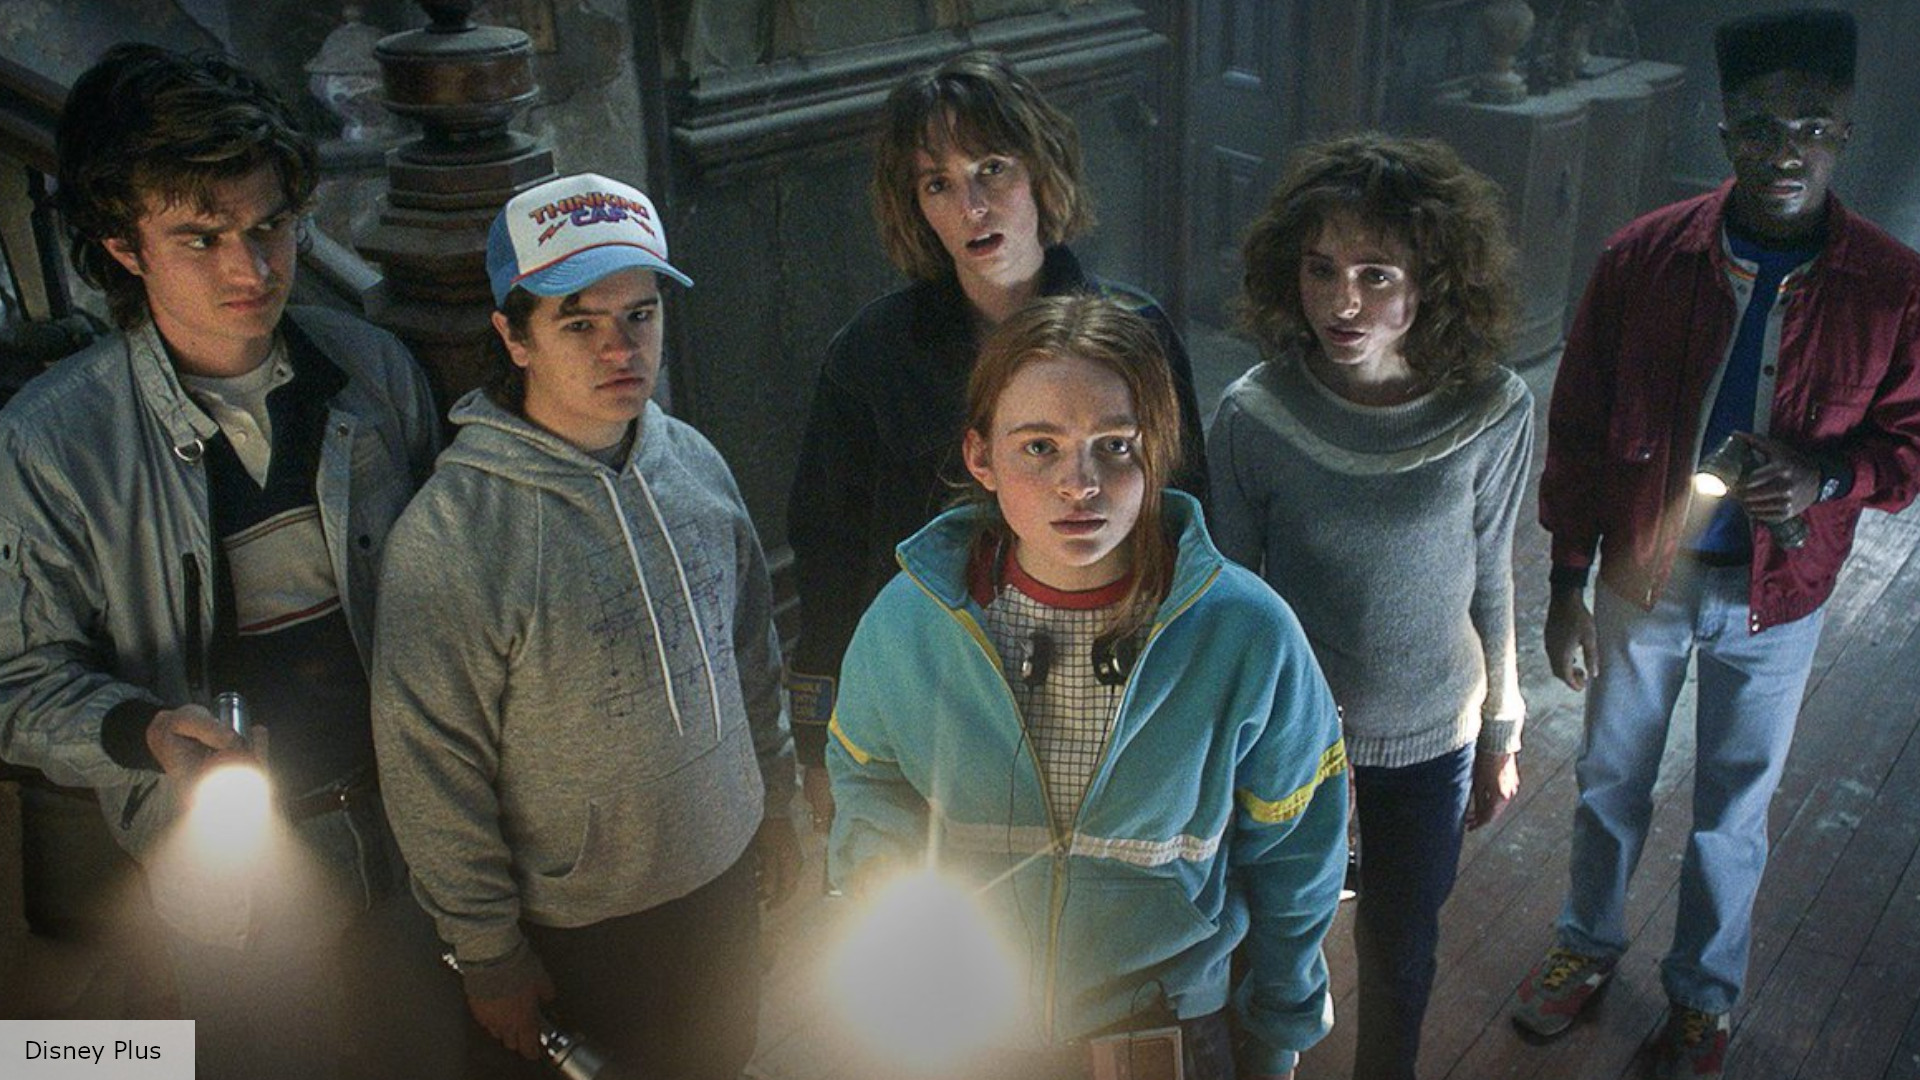 Stranger Things season 4 is now streaming on Netflix | The Digital Fix